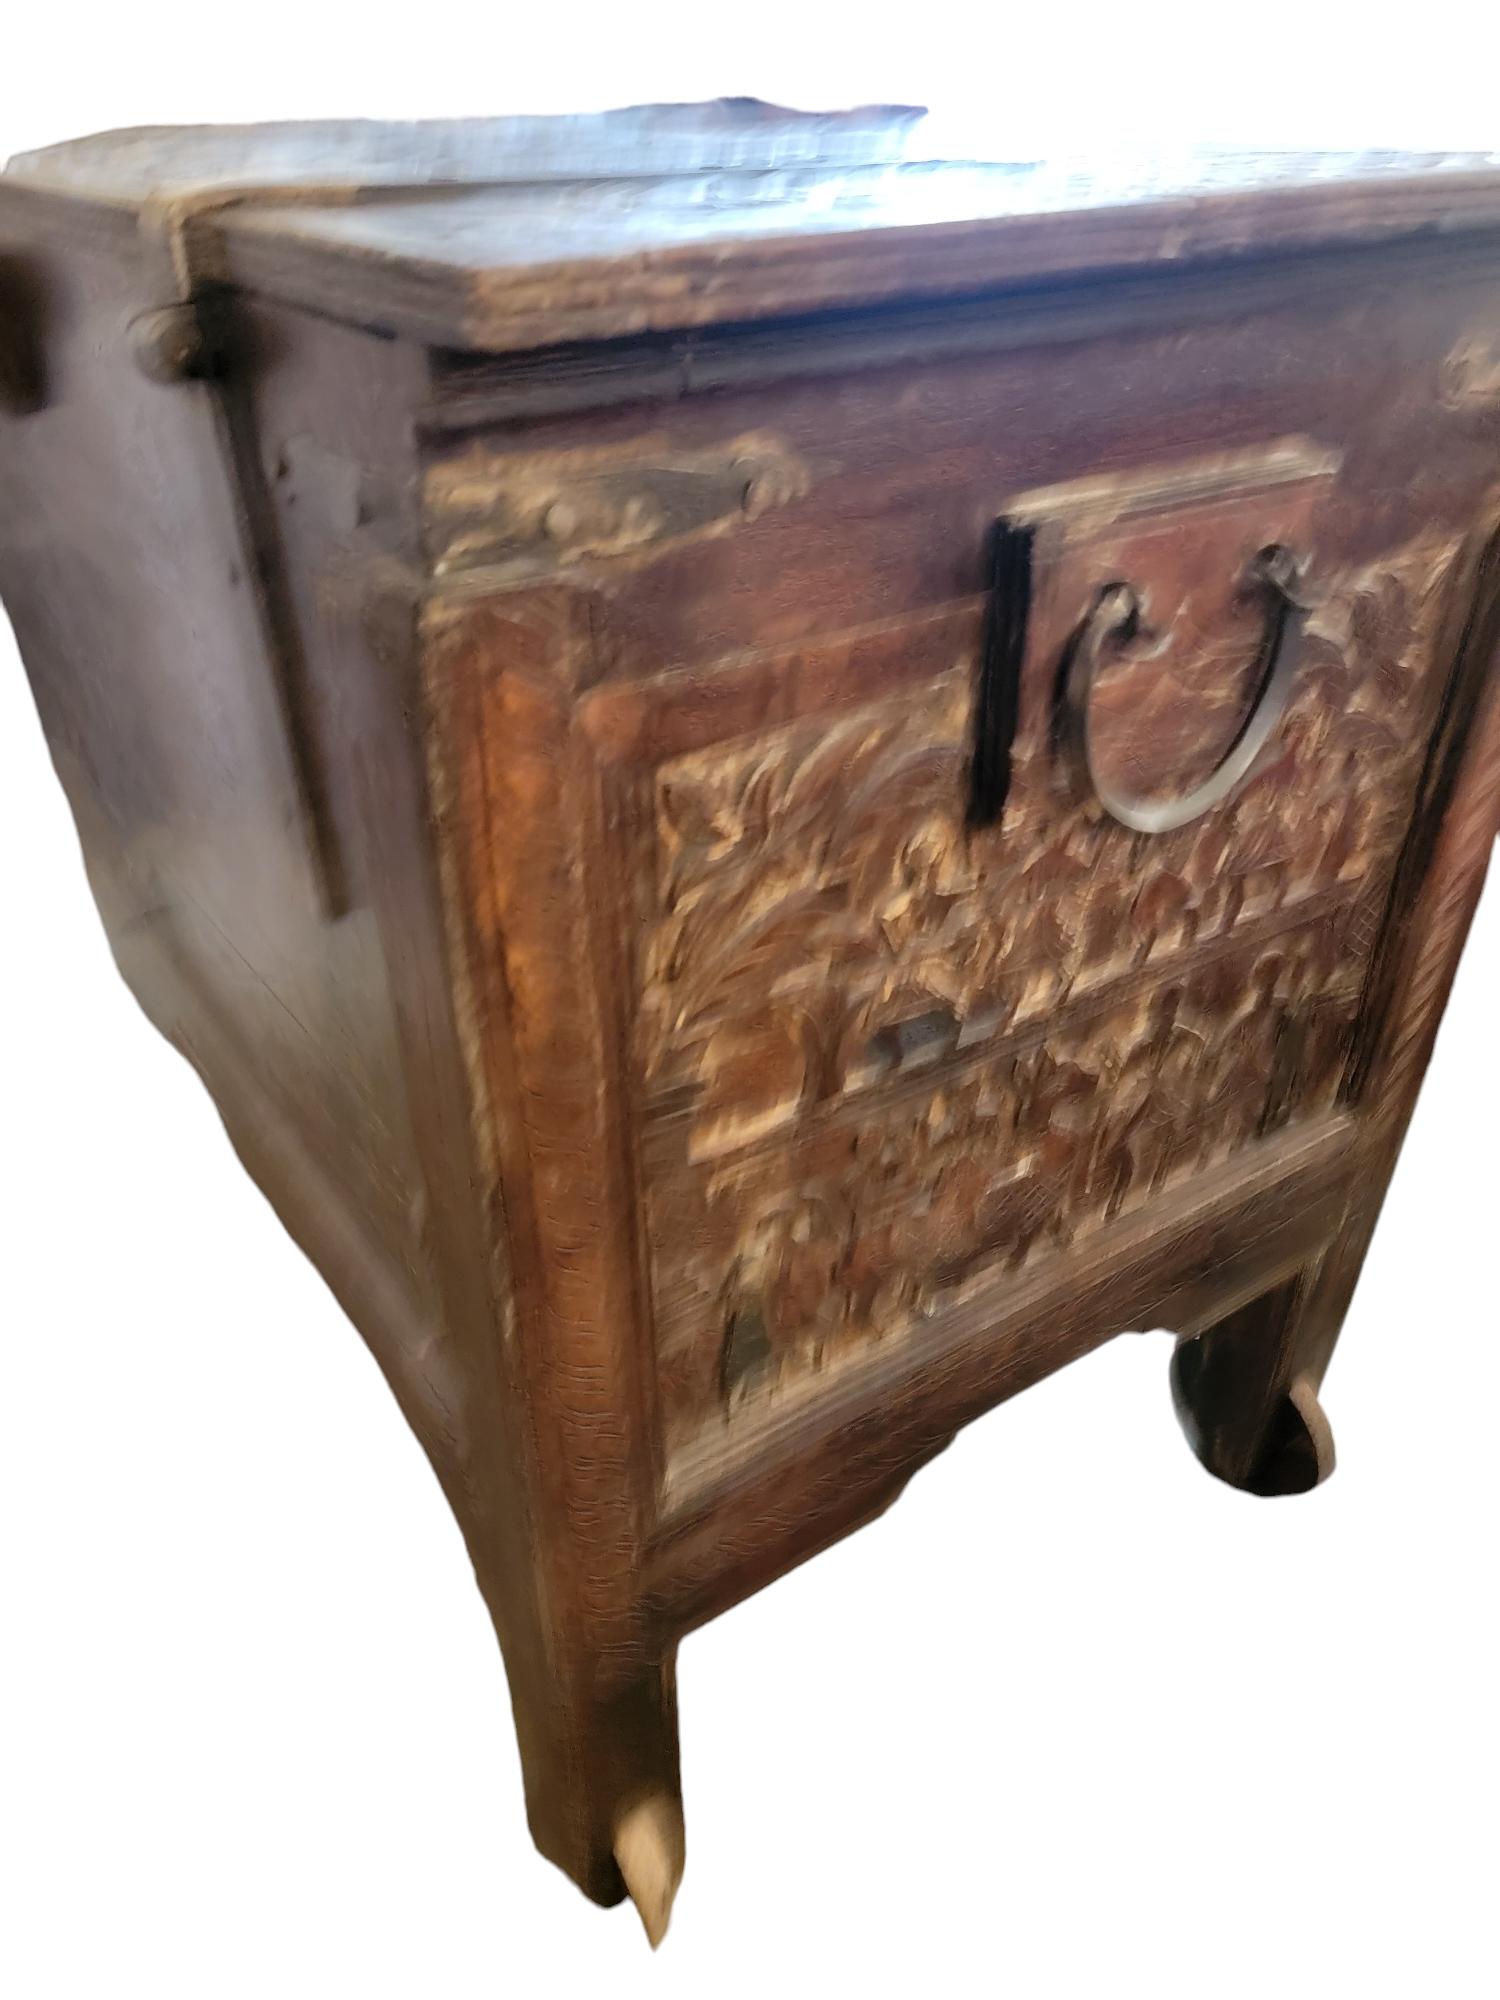 1920s Continental Wooden Chest With Wooden Rollers. Beautiful design with figural carvings on the exterior of the trunk. Iron fitting and hinges provide a strong connection and decorative look to this trunk. Wonderful patina and age. Some minor